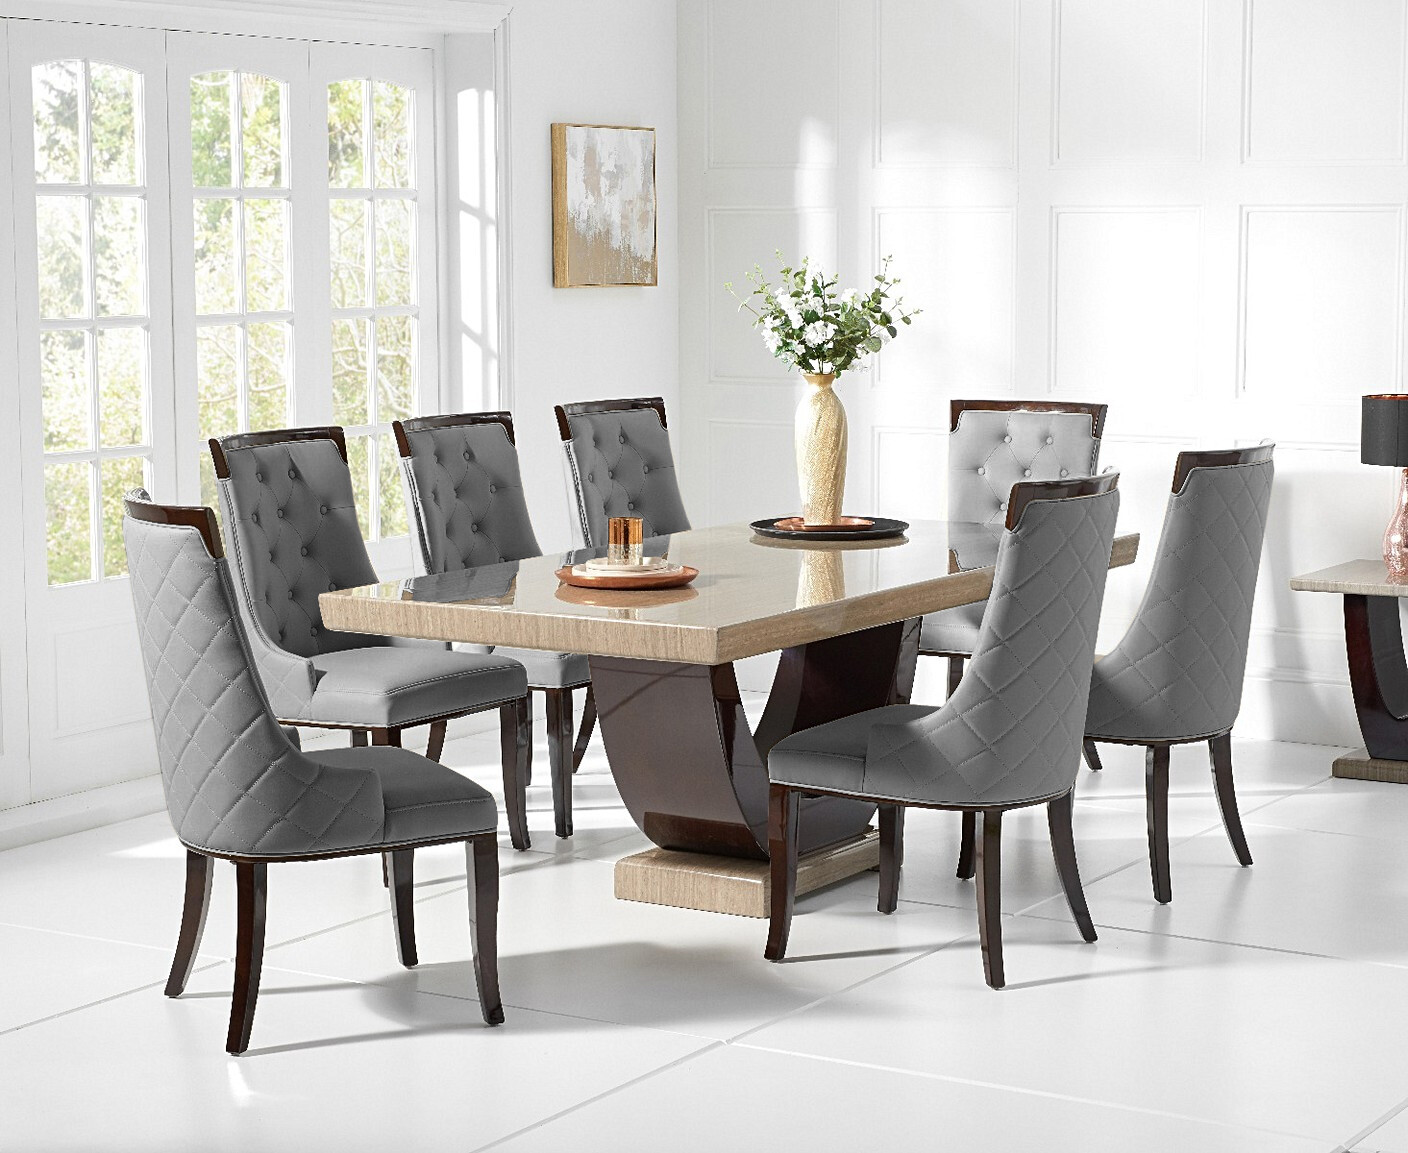 Photo 3 of Novara 200cm brown pedestal marble dining table with 6 grey francesca chairs